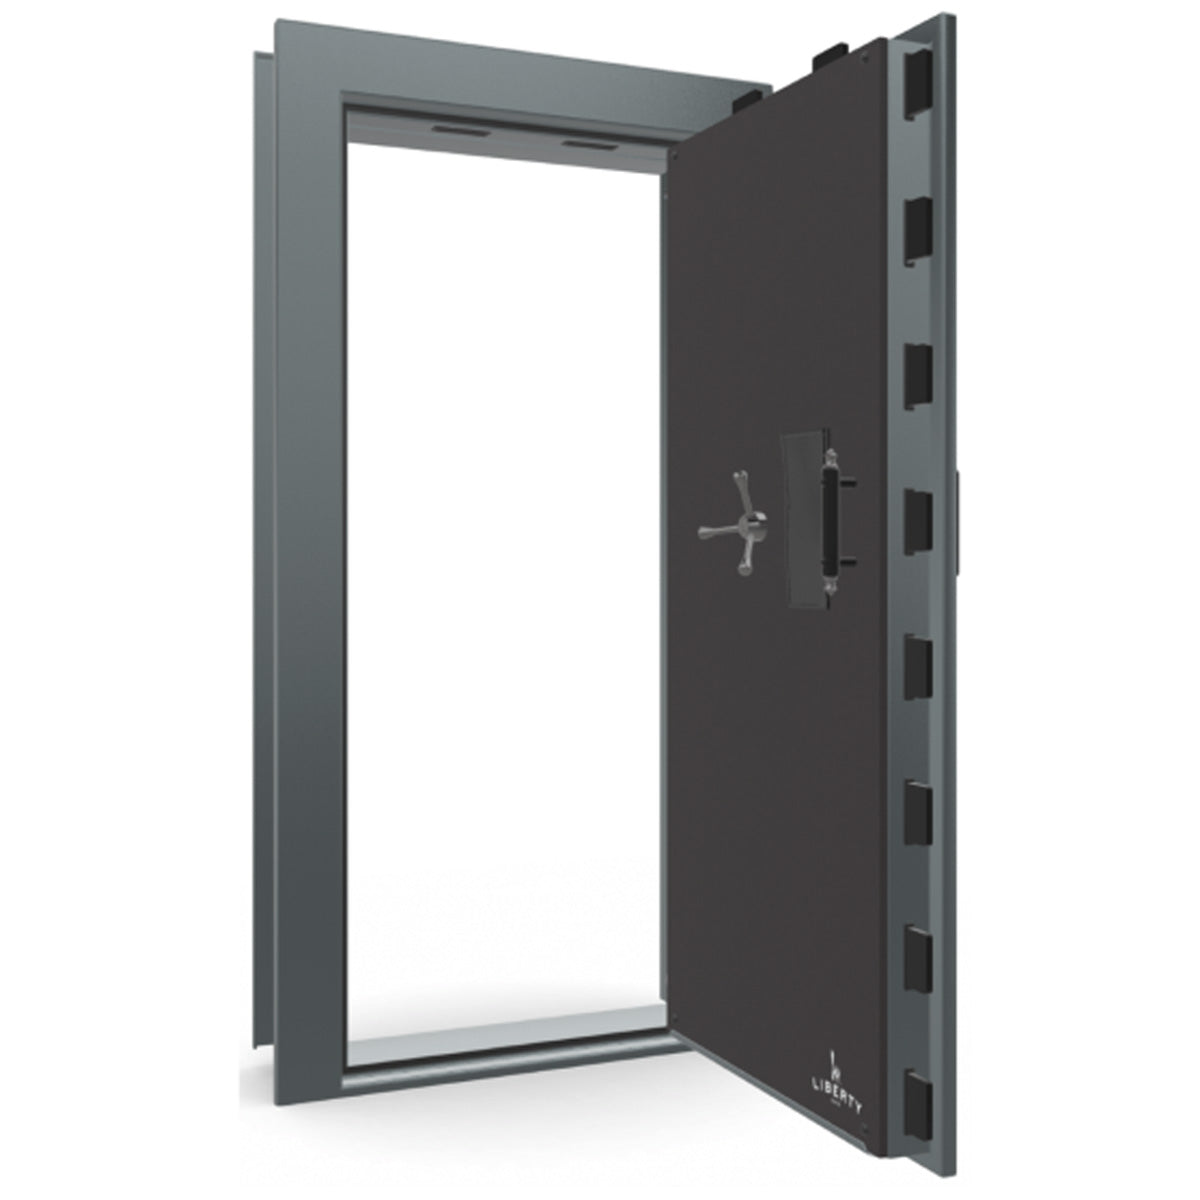 The Beast Vault Door in Forest Mist Gloss with Black Chrome Electronic Lock, Right Outswing, door open.